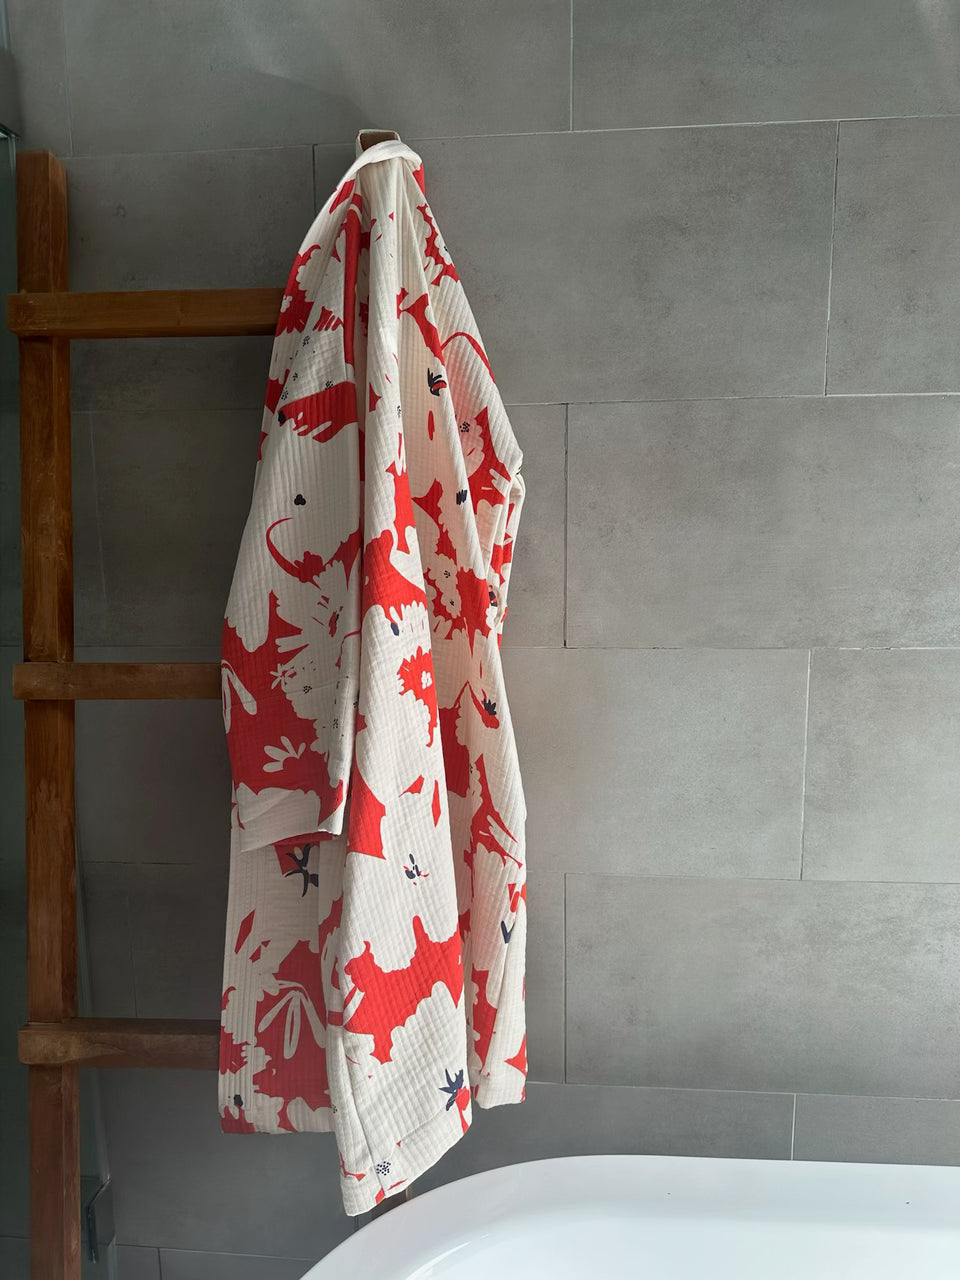 Sakura Kimono - 100% cotton with contemporary pattern in sakura red and off white, can be used as a bath or home robe but also as a jacket